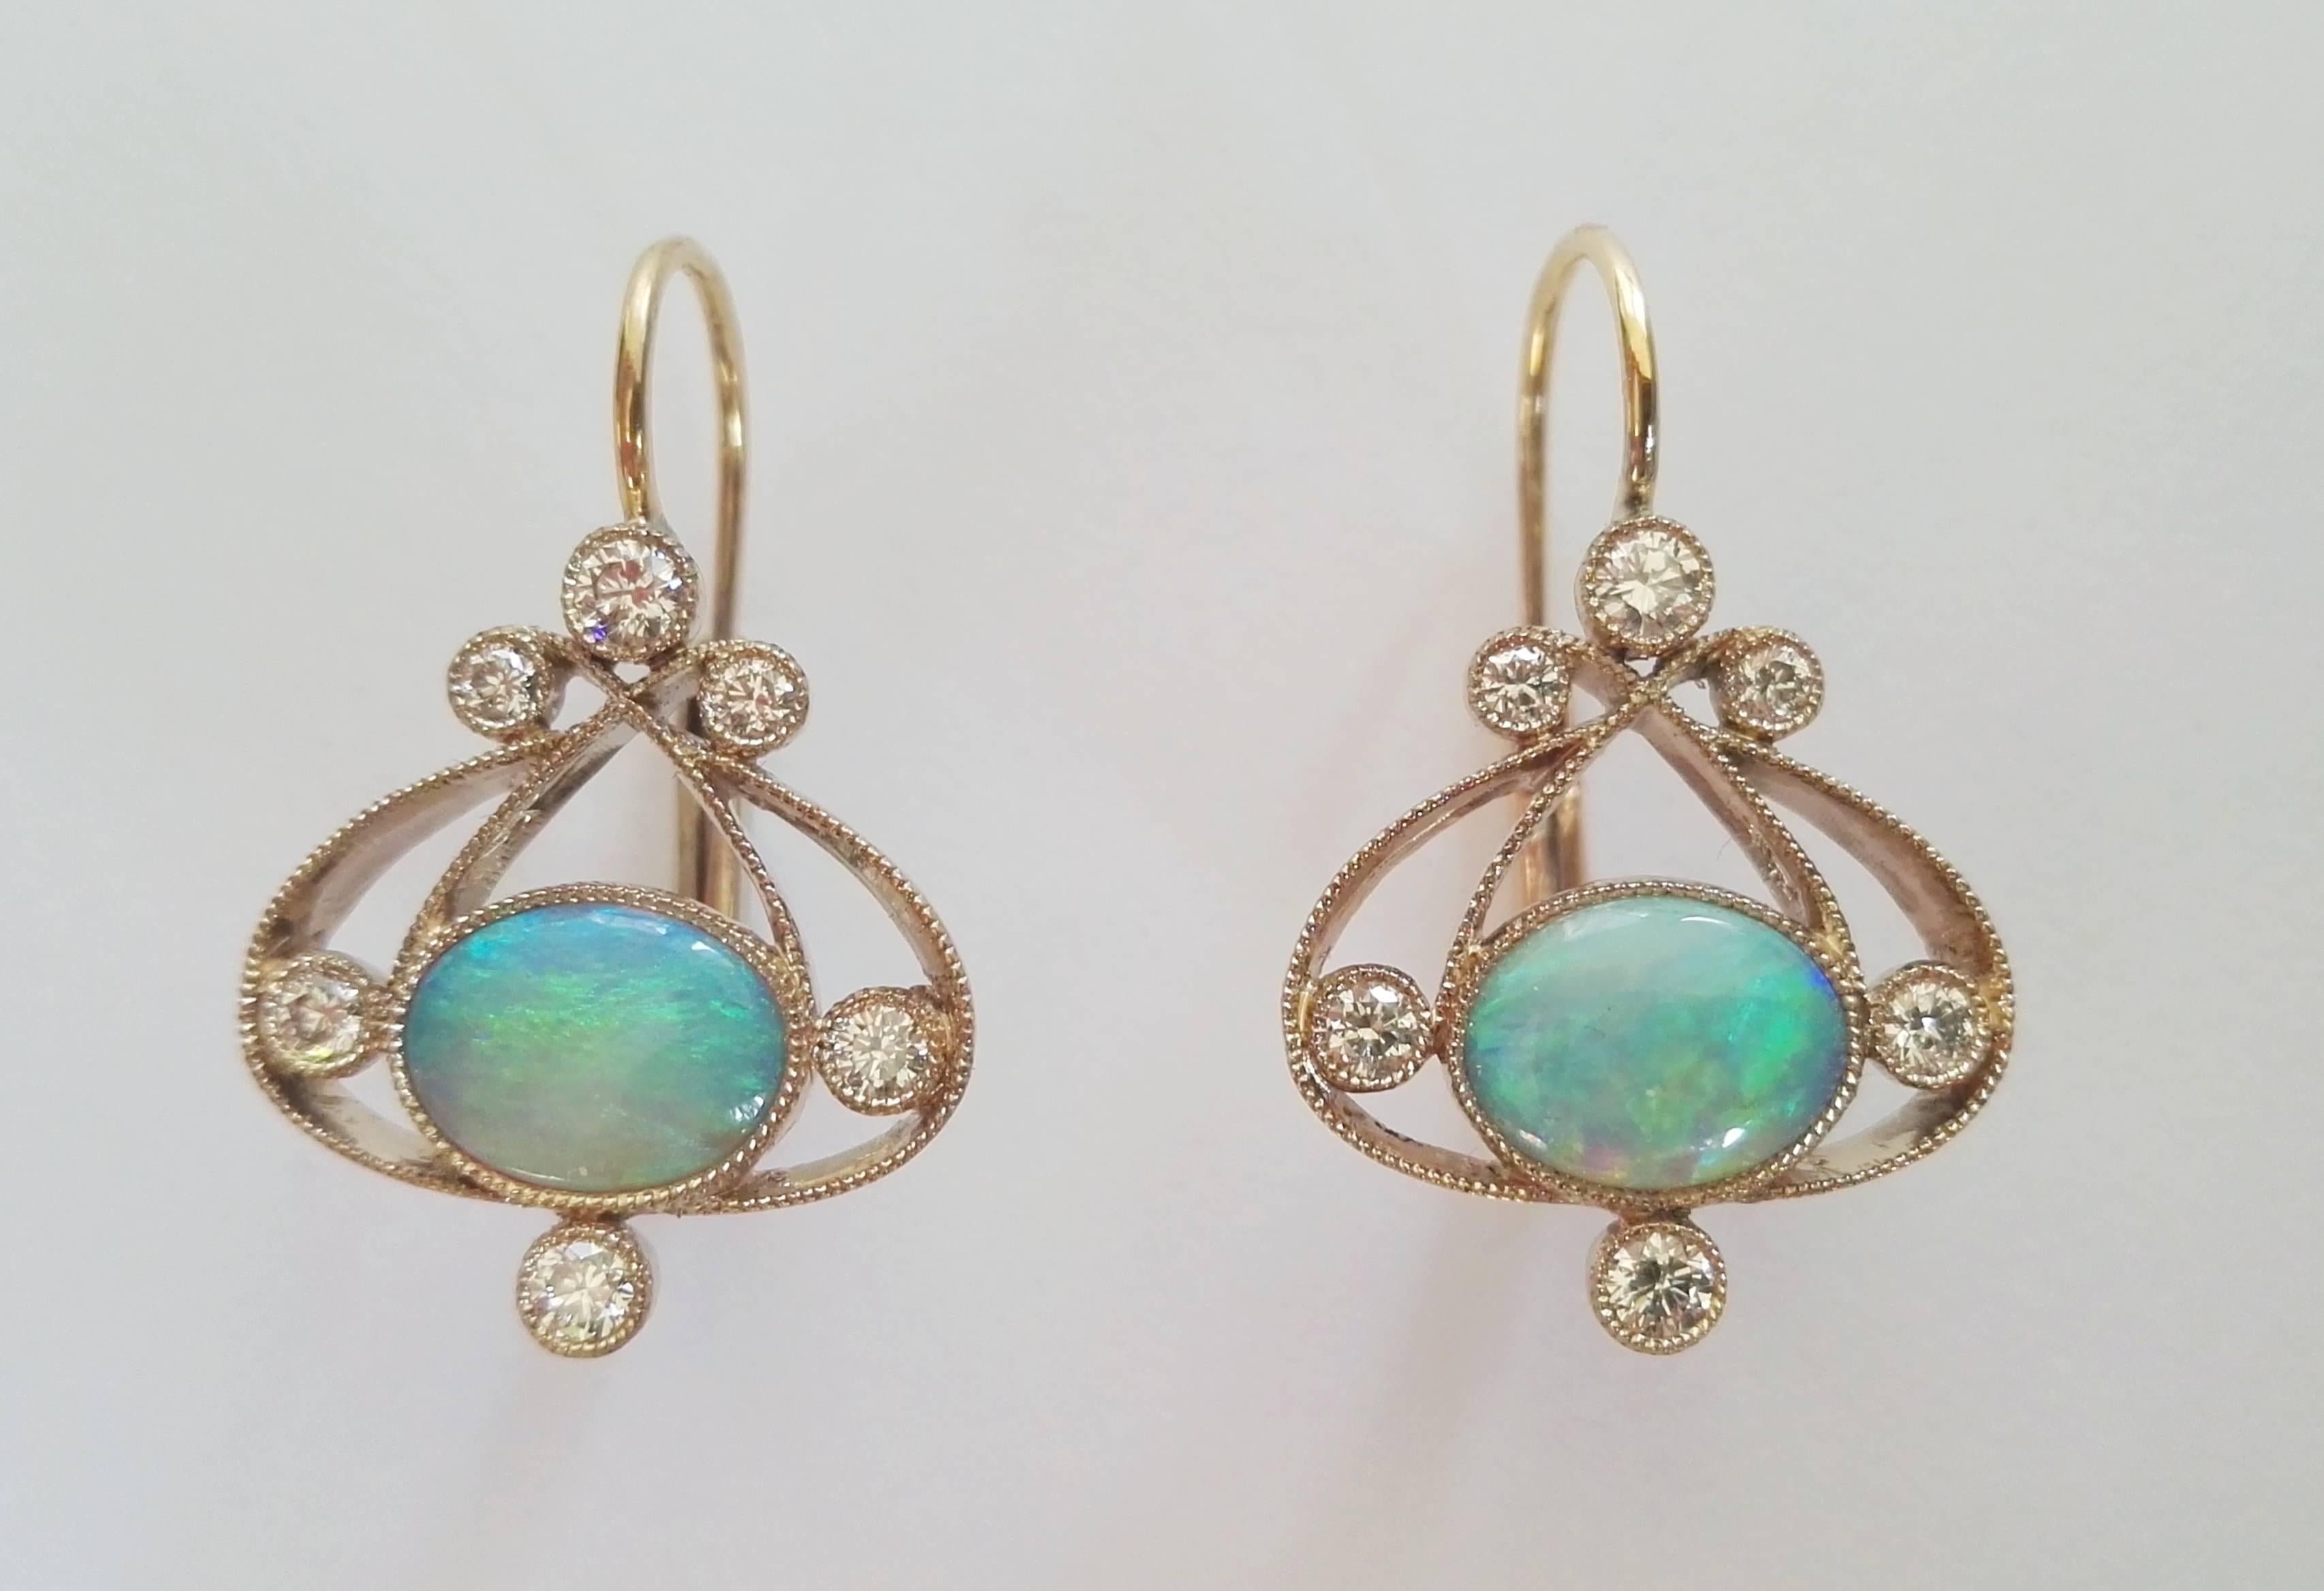 Dalben design Opal earrings with 2 Australian Opals weighing 1,4 carats and 12 white round brillant cut Diamonds weighing 0,40 carats mounted in 18 kt warm white gold.
Dimension:
width 14,9 mm
height without leverback 16,7 mm
The earrings has